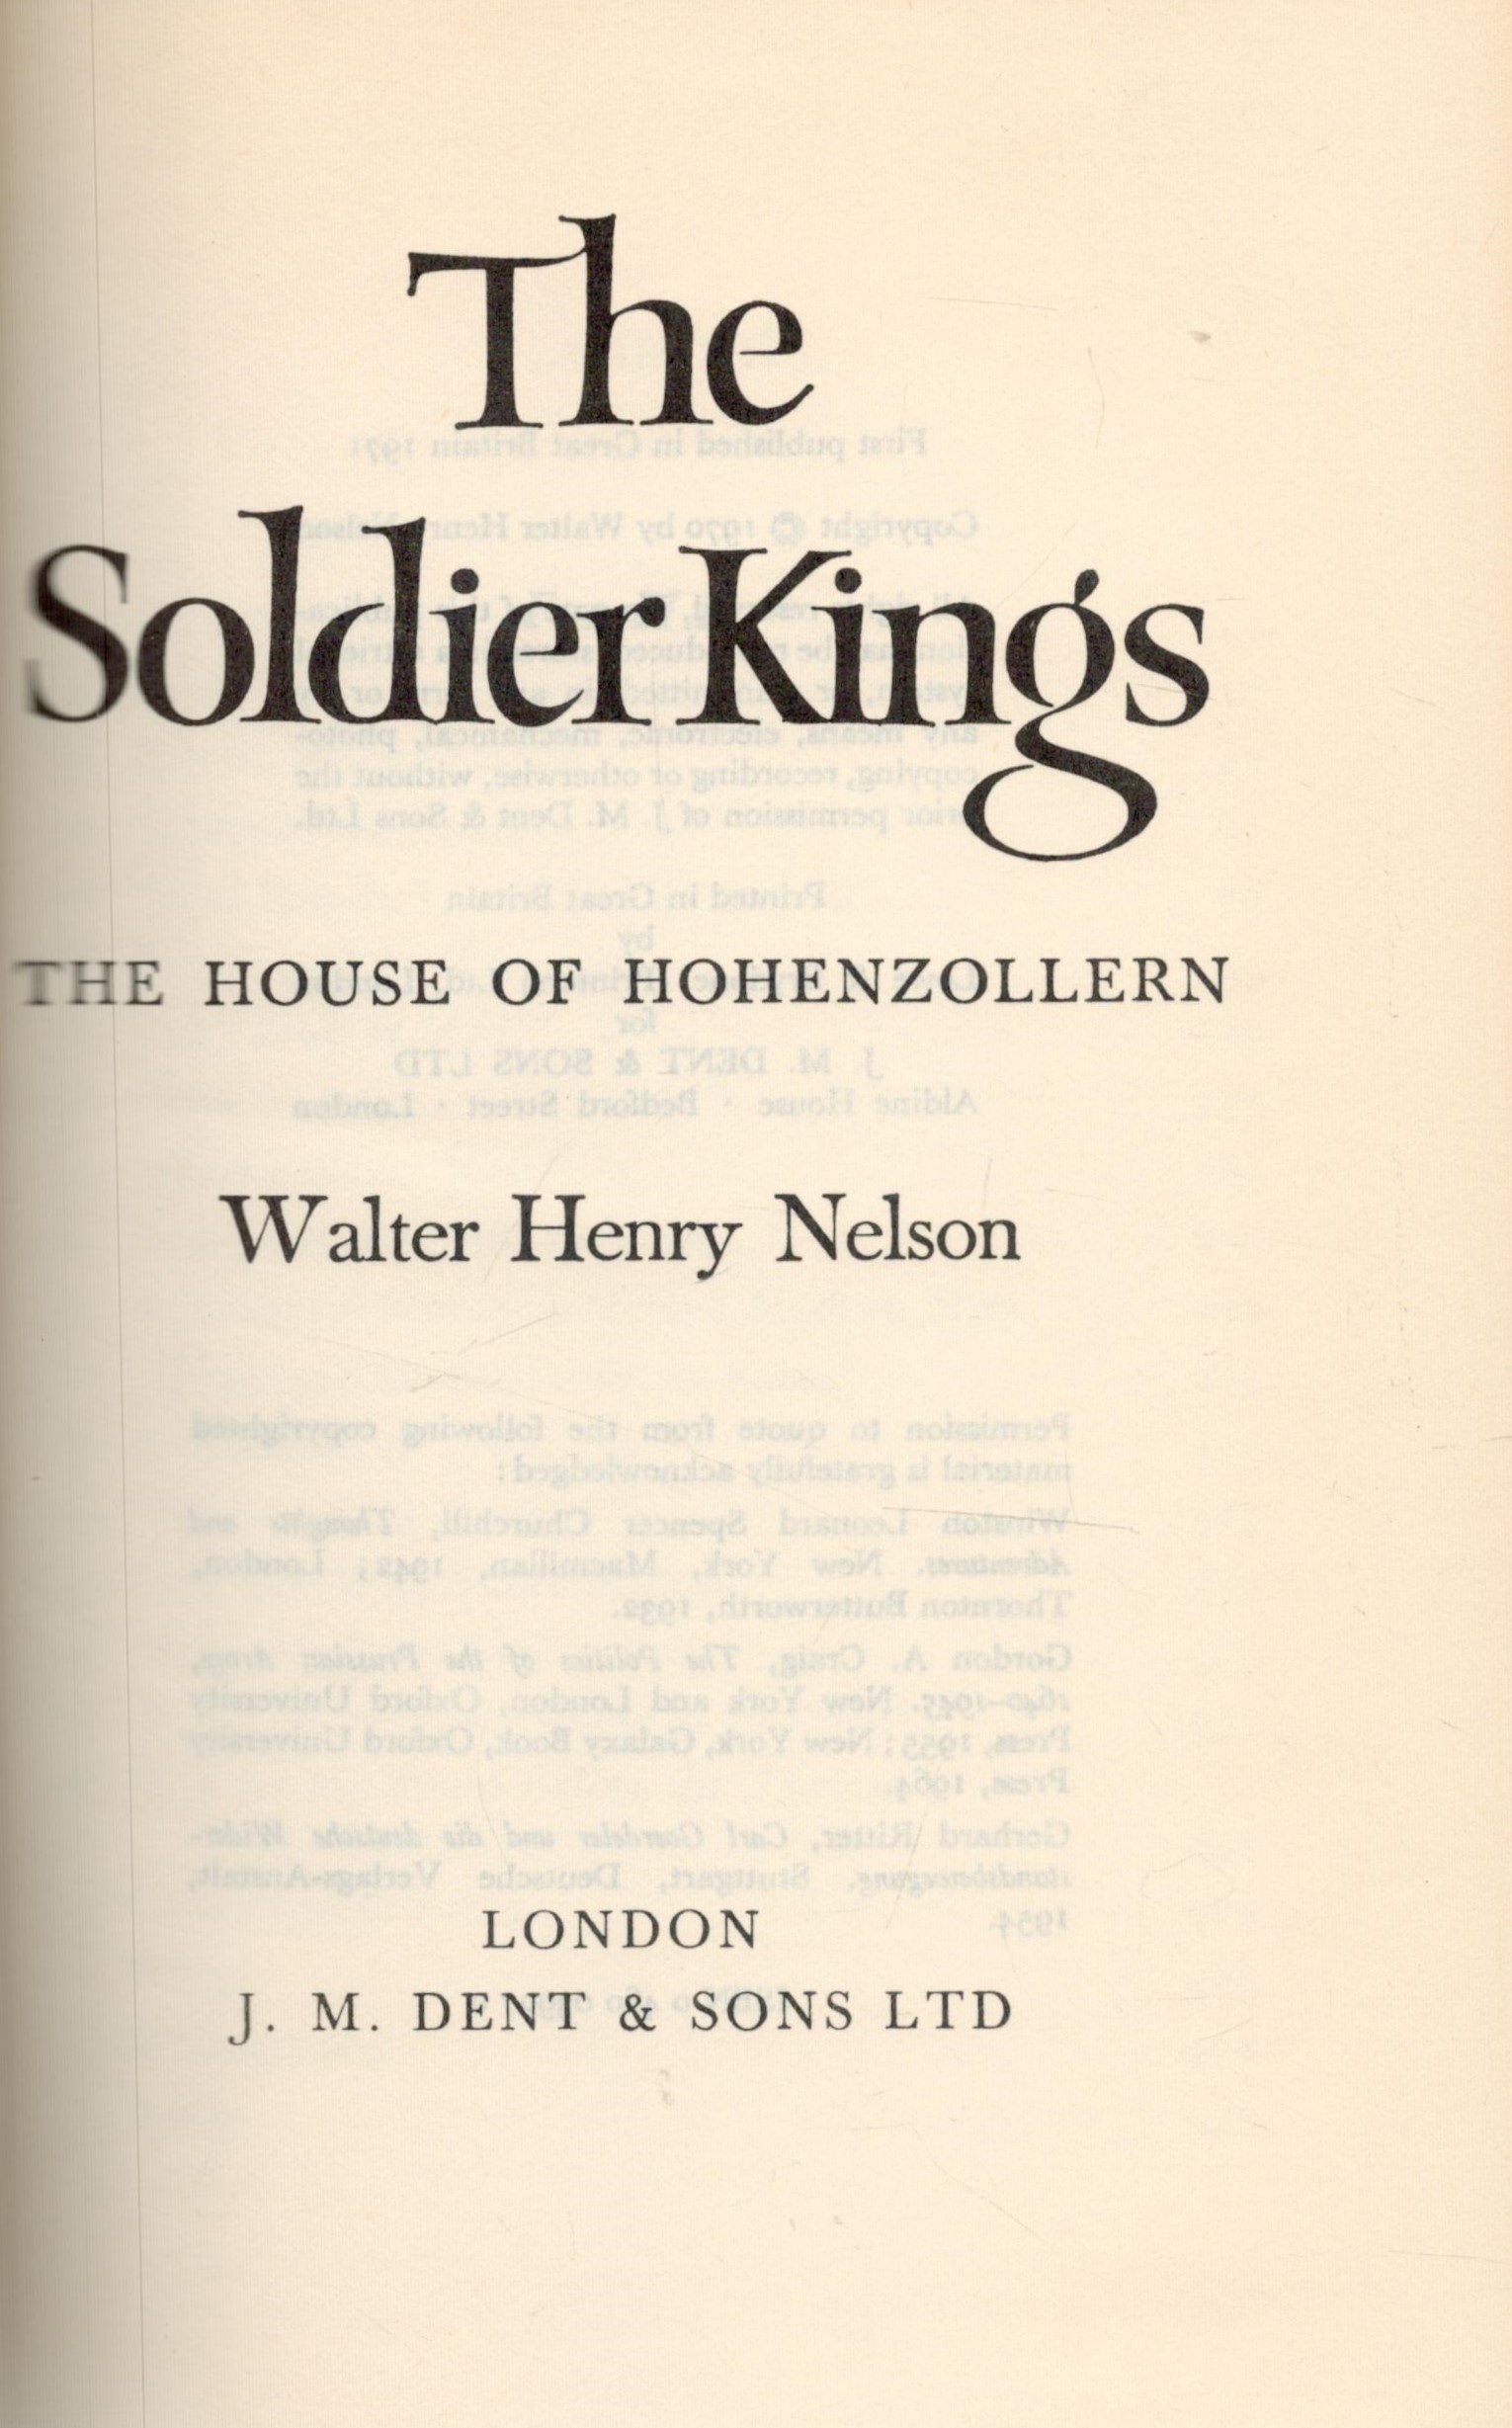 The Soldier Kings The House Of Hohenzollern by Walter Henry Nelson 1971 First UK Edition Hardback - Image 2 of 3